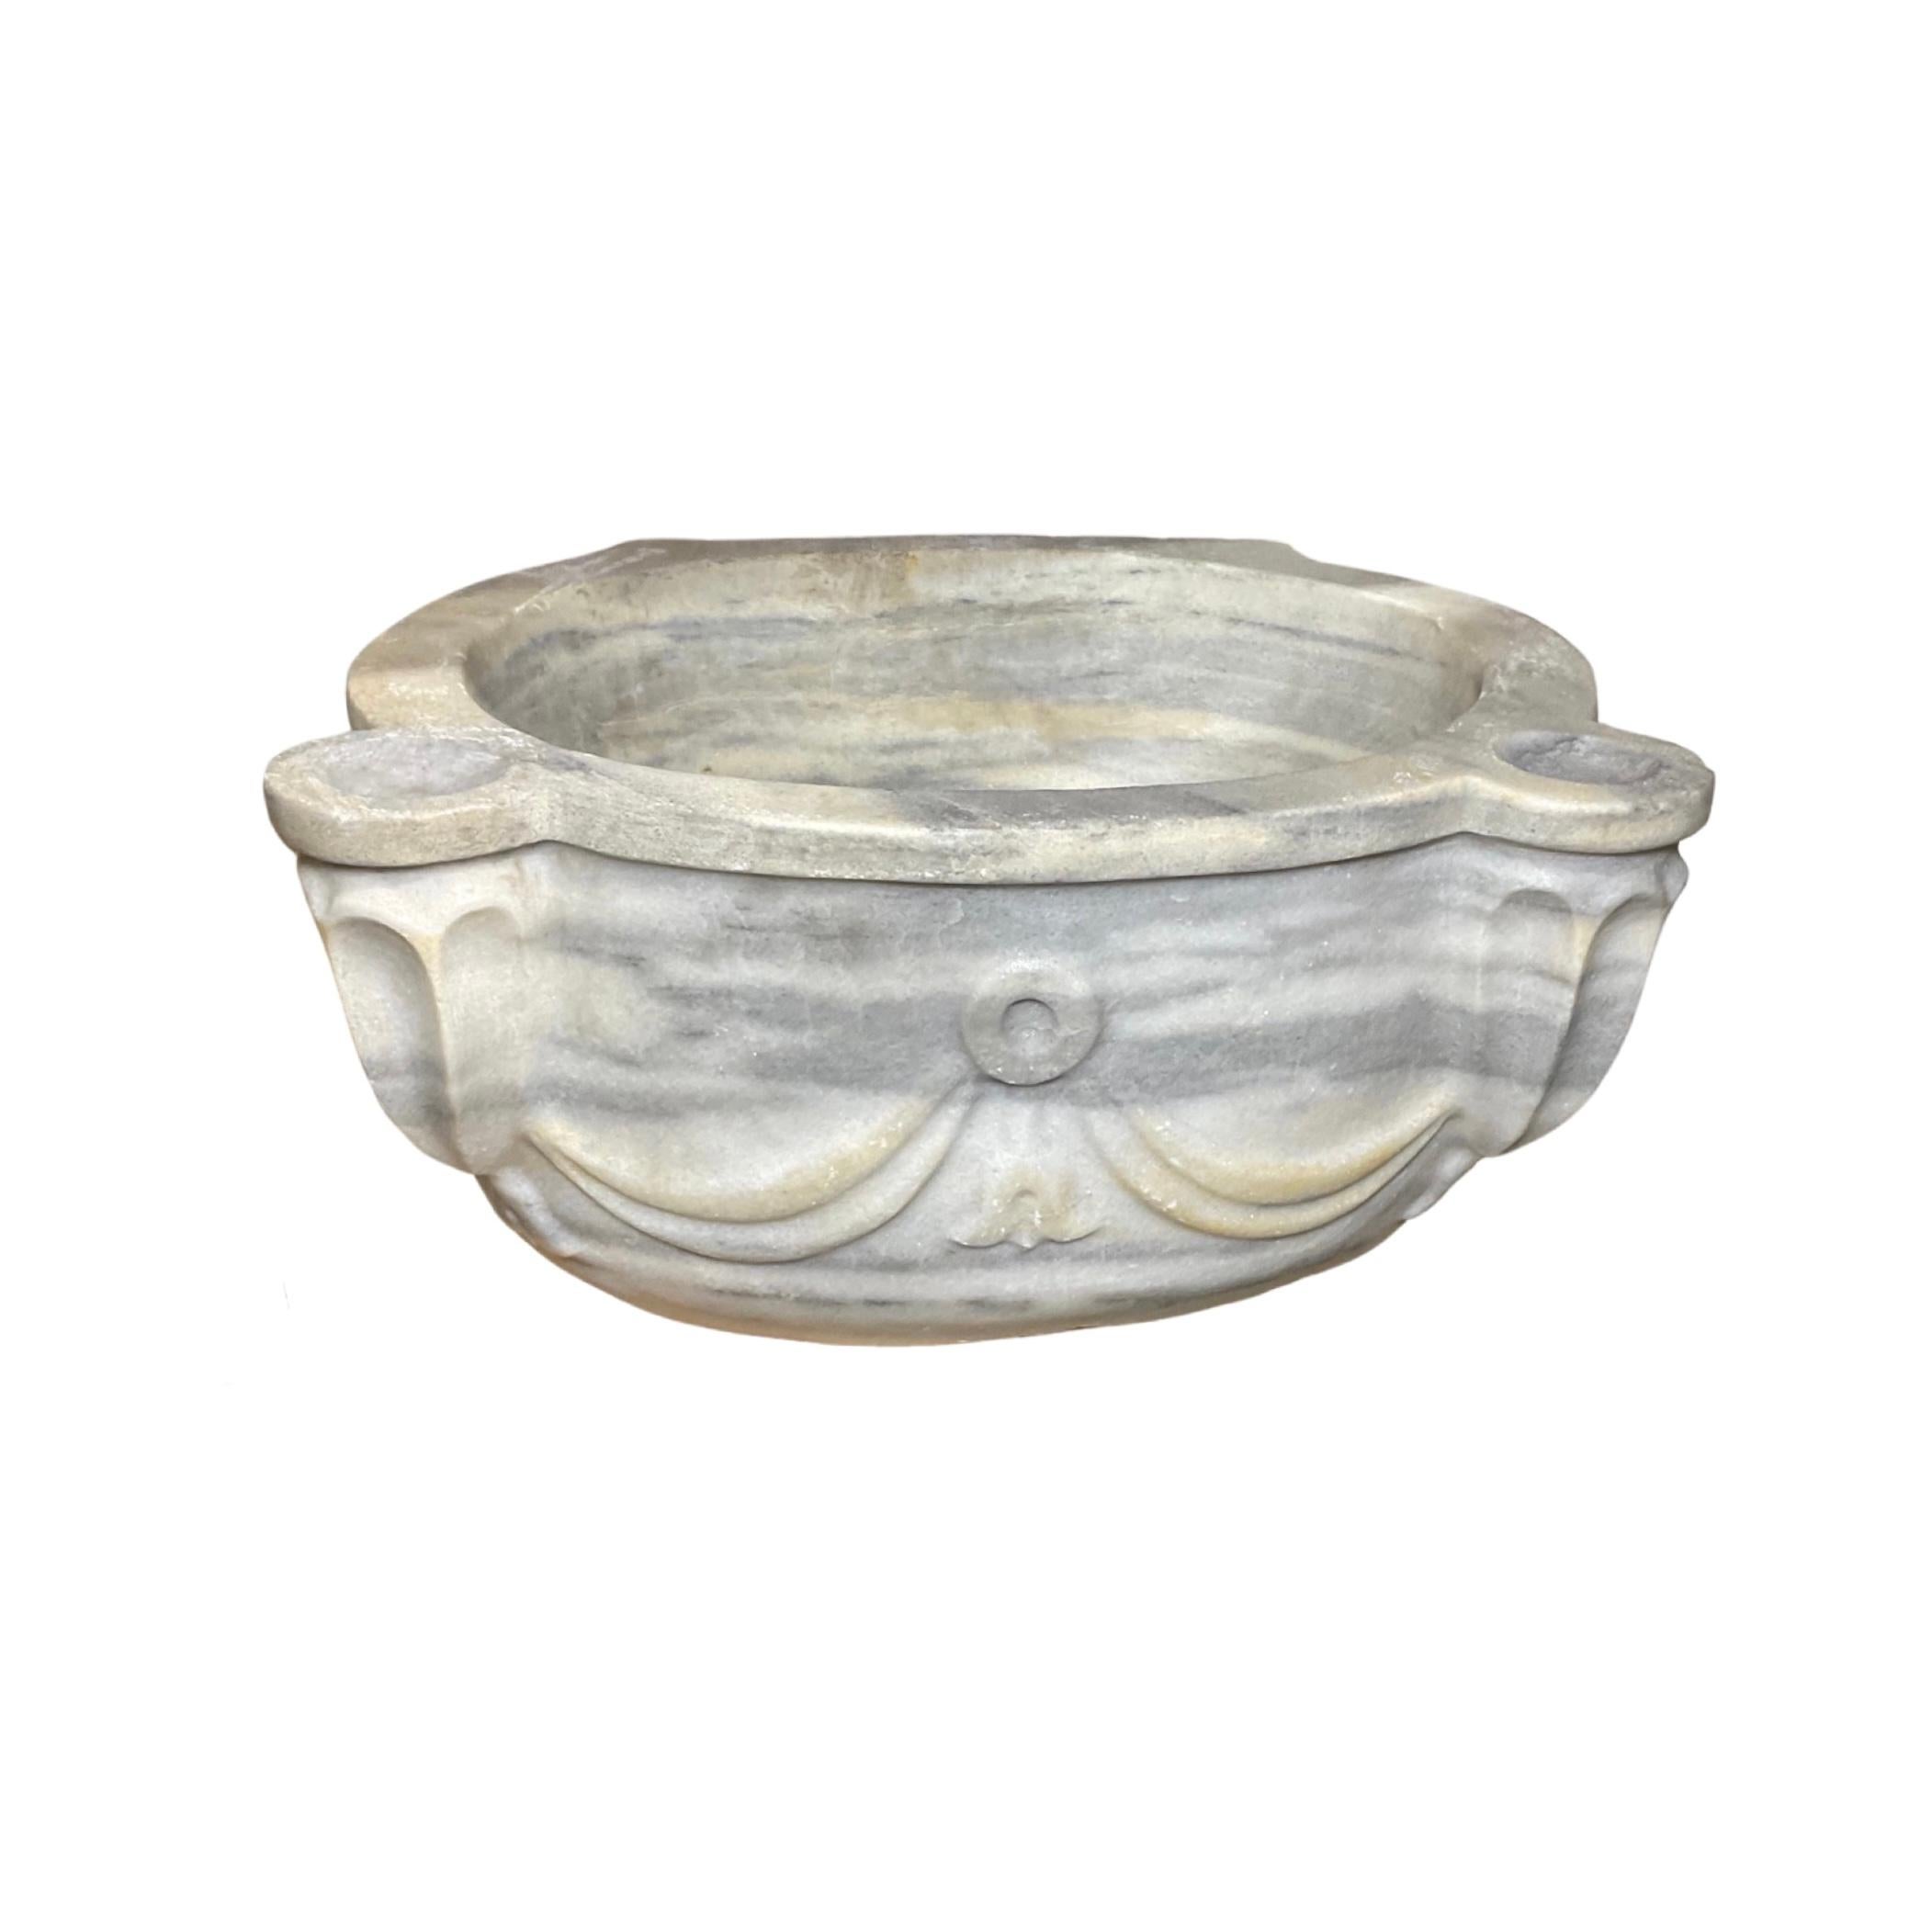 This stunning French White Marble Sink is an exact replica of the ones installed in palaces during the 18th century. Its timeless look and classic design will easily elevate the style of any bathroom.